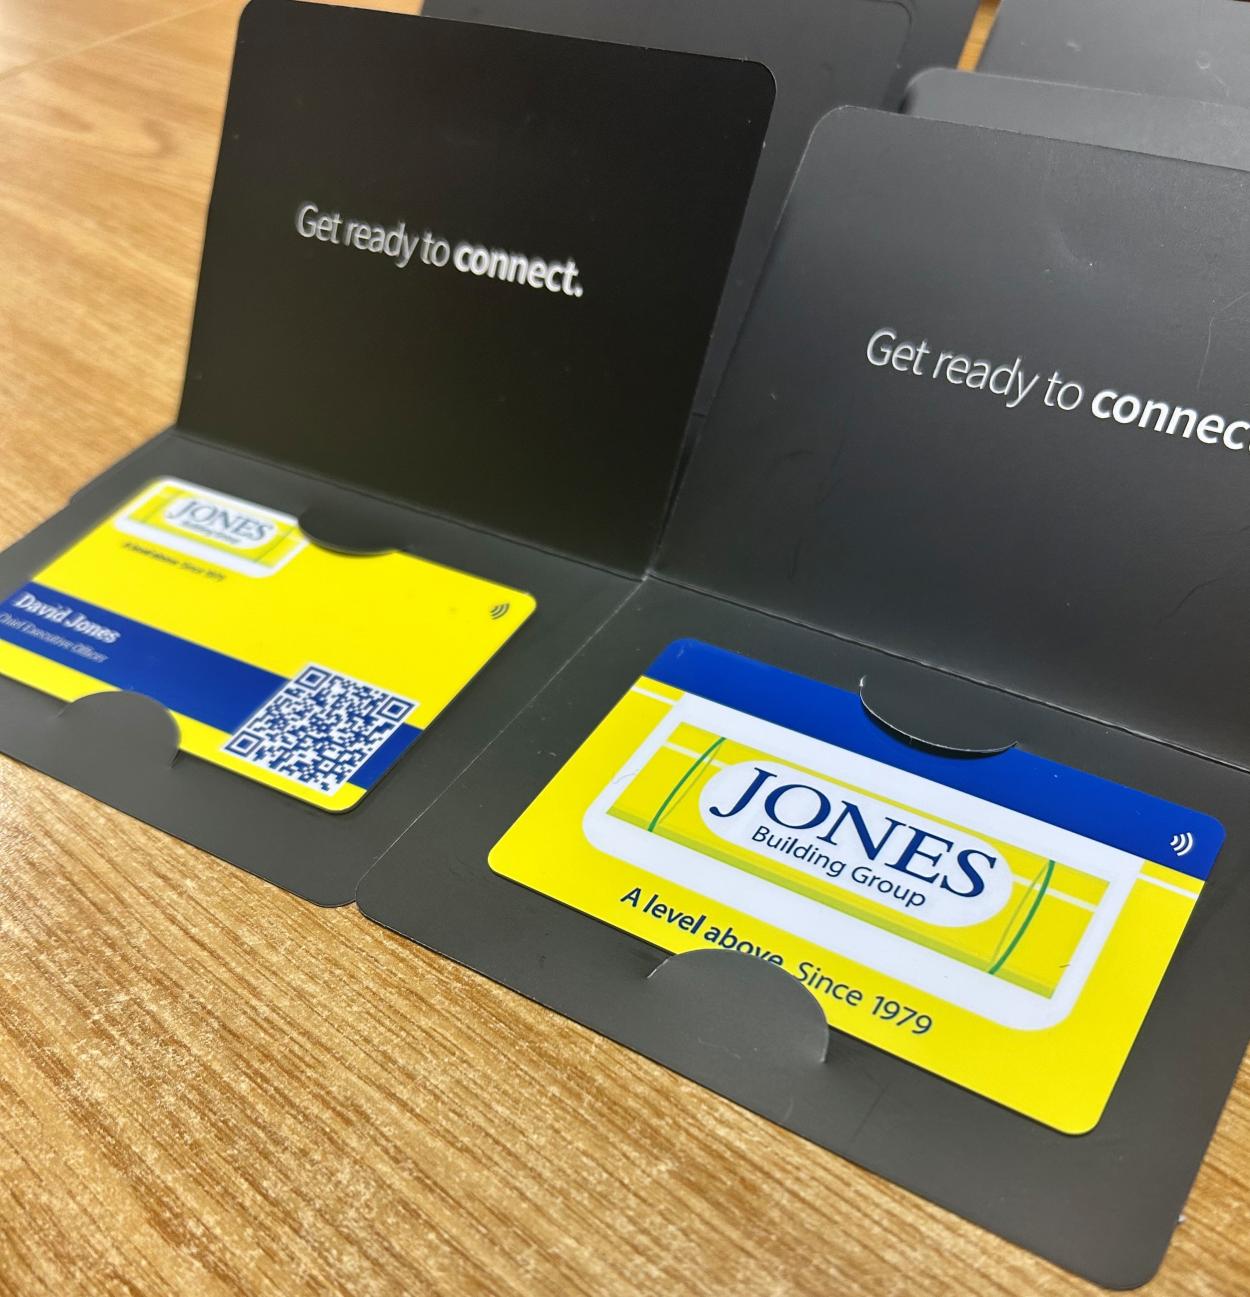 We have recently updated all of our business cards to the new contactless Evrycard.